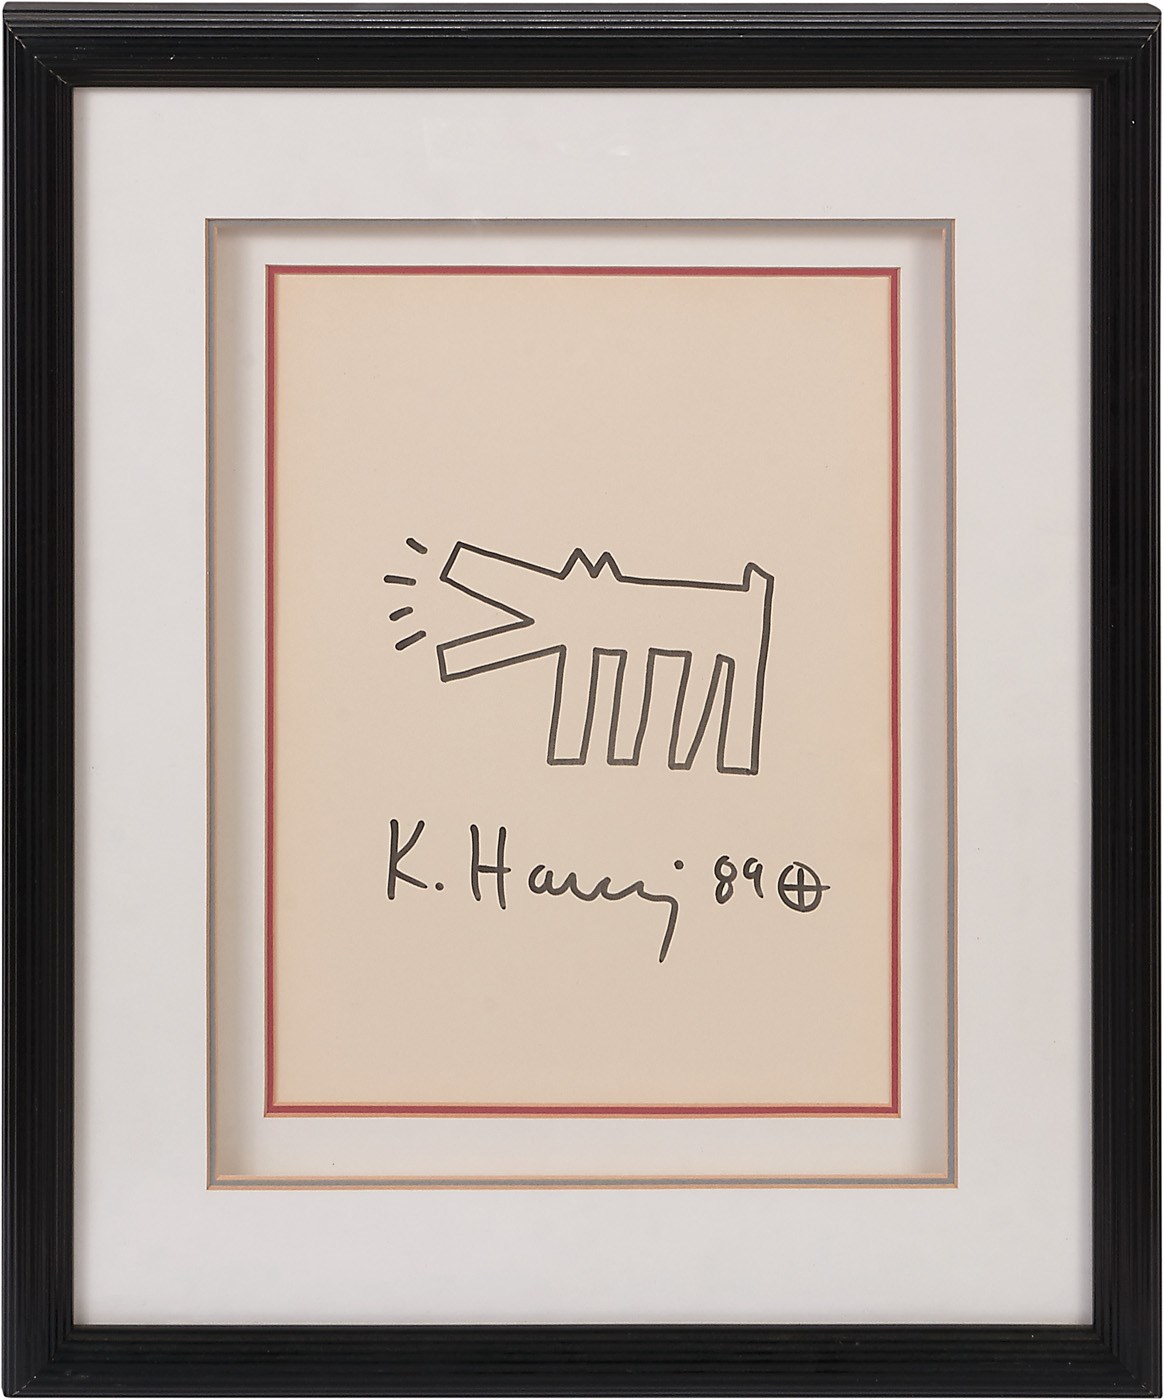 - 1989 "Barking Dog" Original Drawing by Keith Haring (ex-Charlie Sheen Collection)